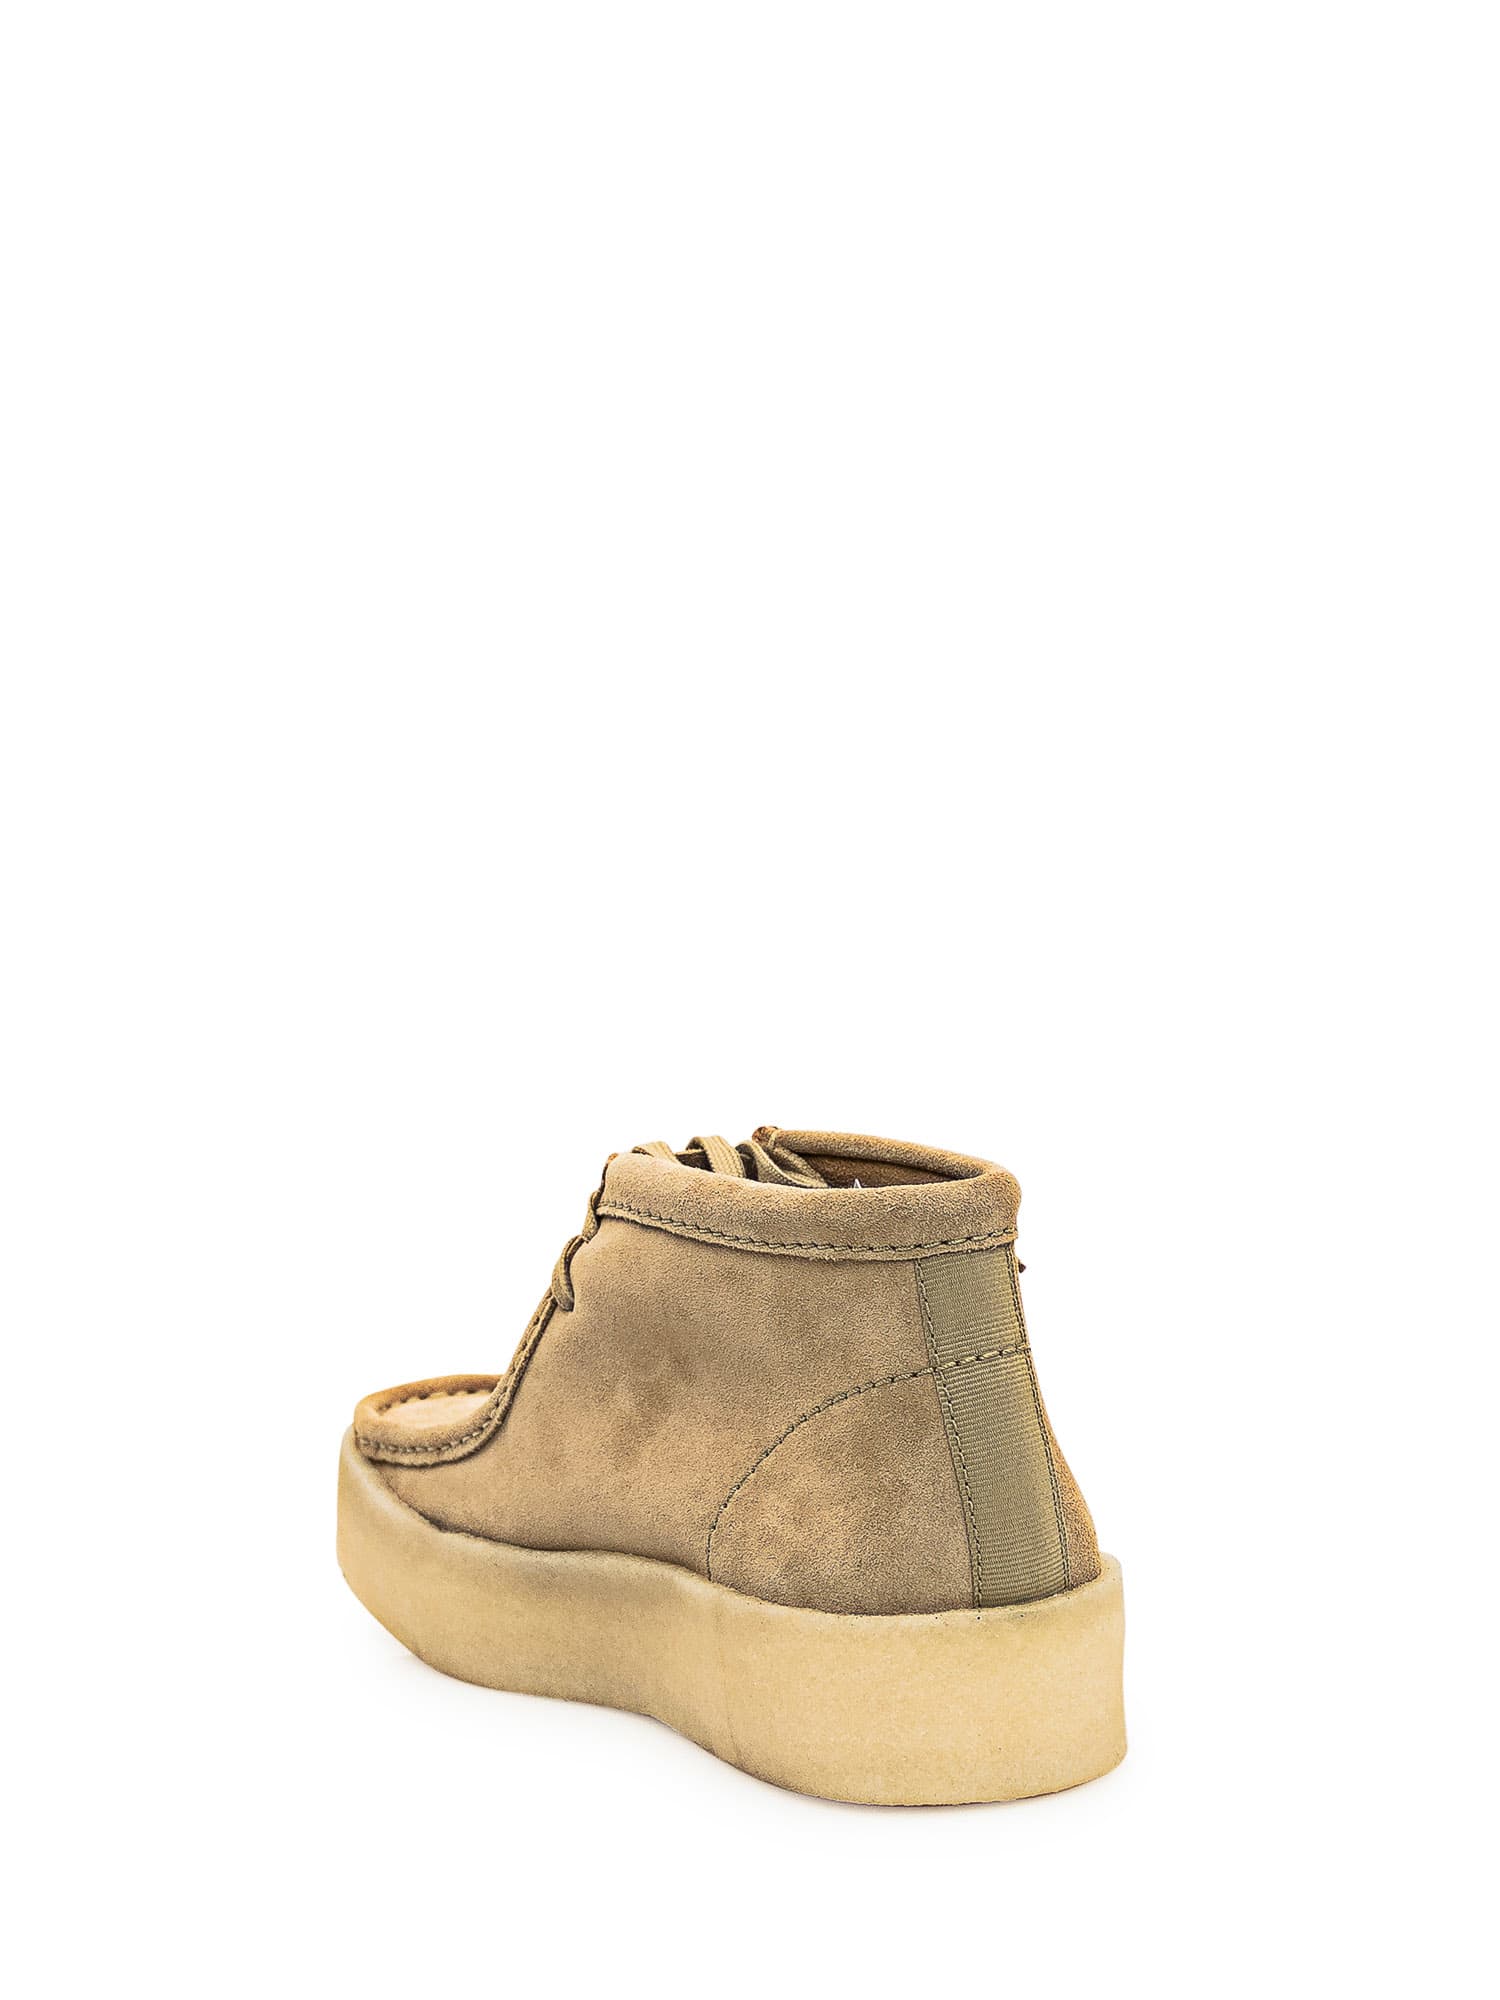 Shop Clarks Wallabeecup Boots In Maple Suede